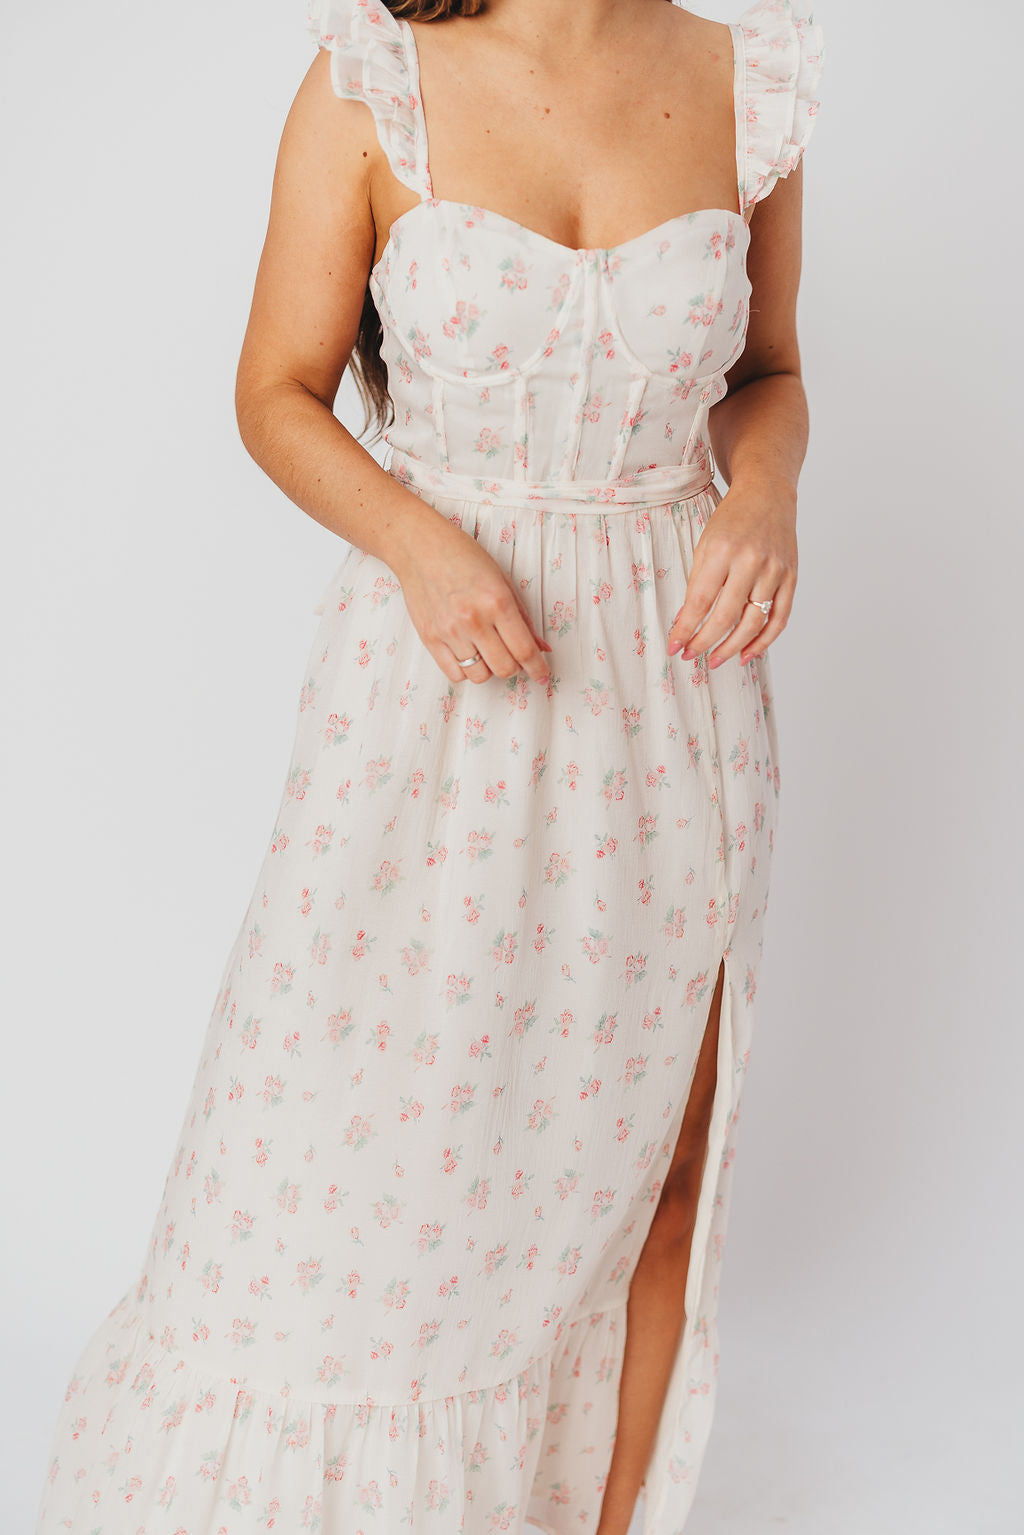 Rosamund Bustier-Style Maxi Dress in Blush Pink Floral -Inclusive Sizing (S-3XL)